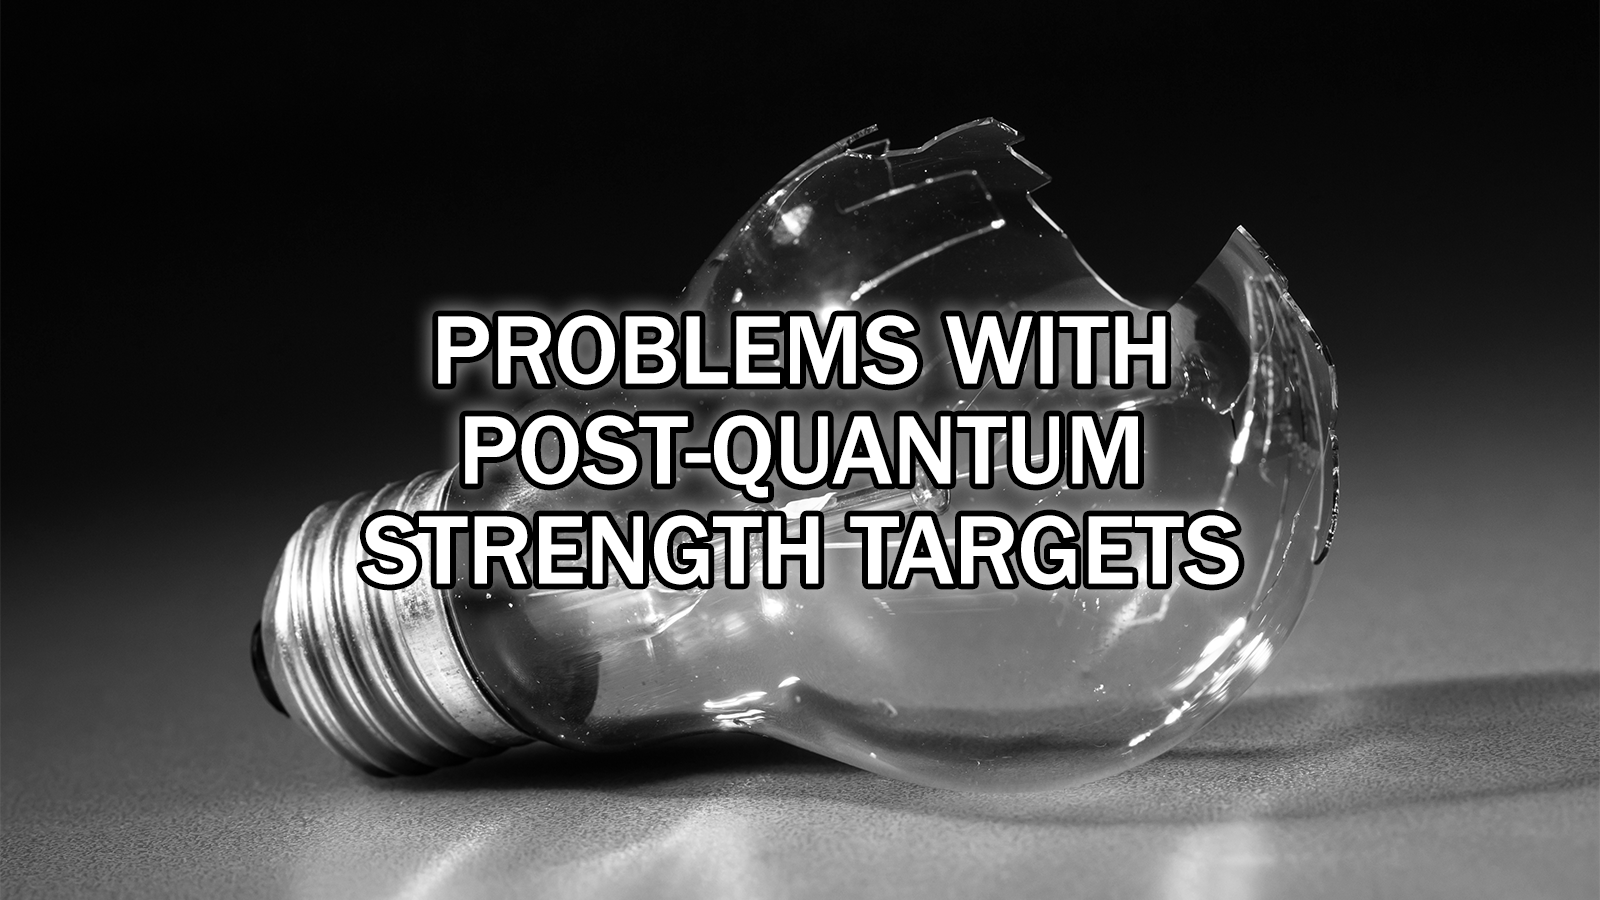 A Serious Concern About Post-Quantum Cryptography and Strength Targets